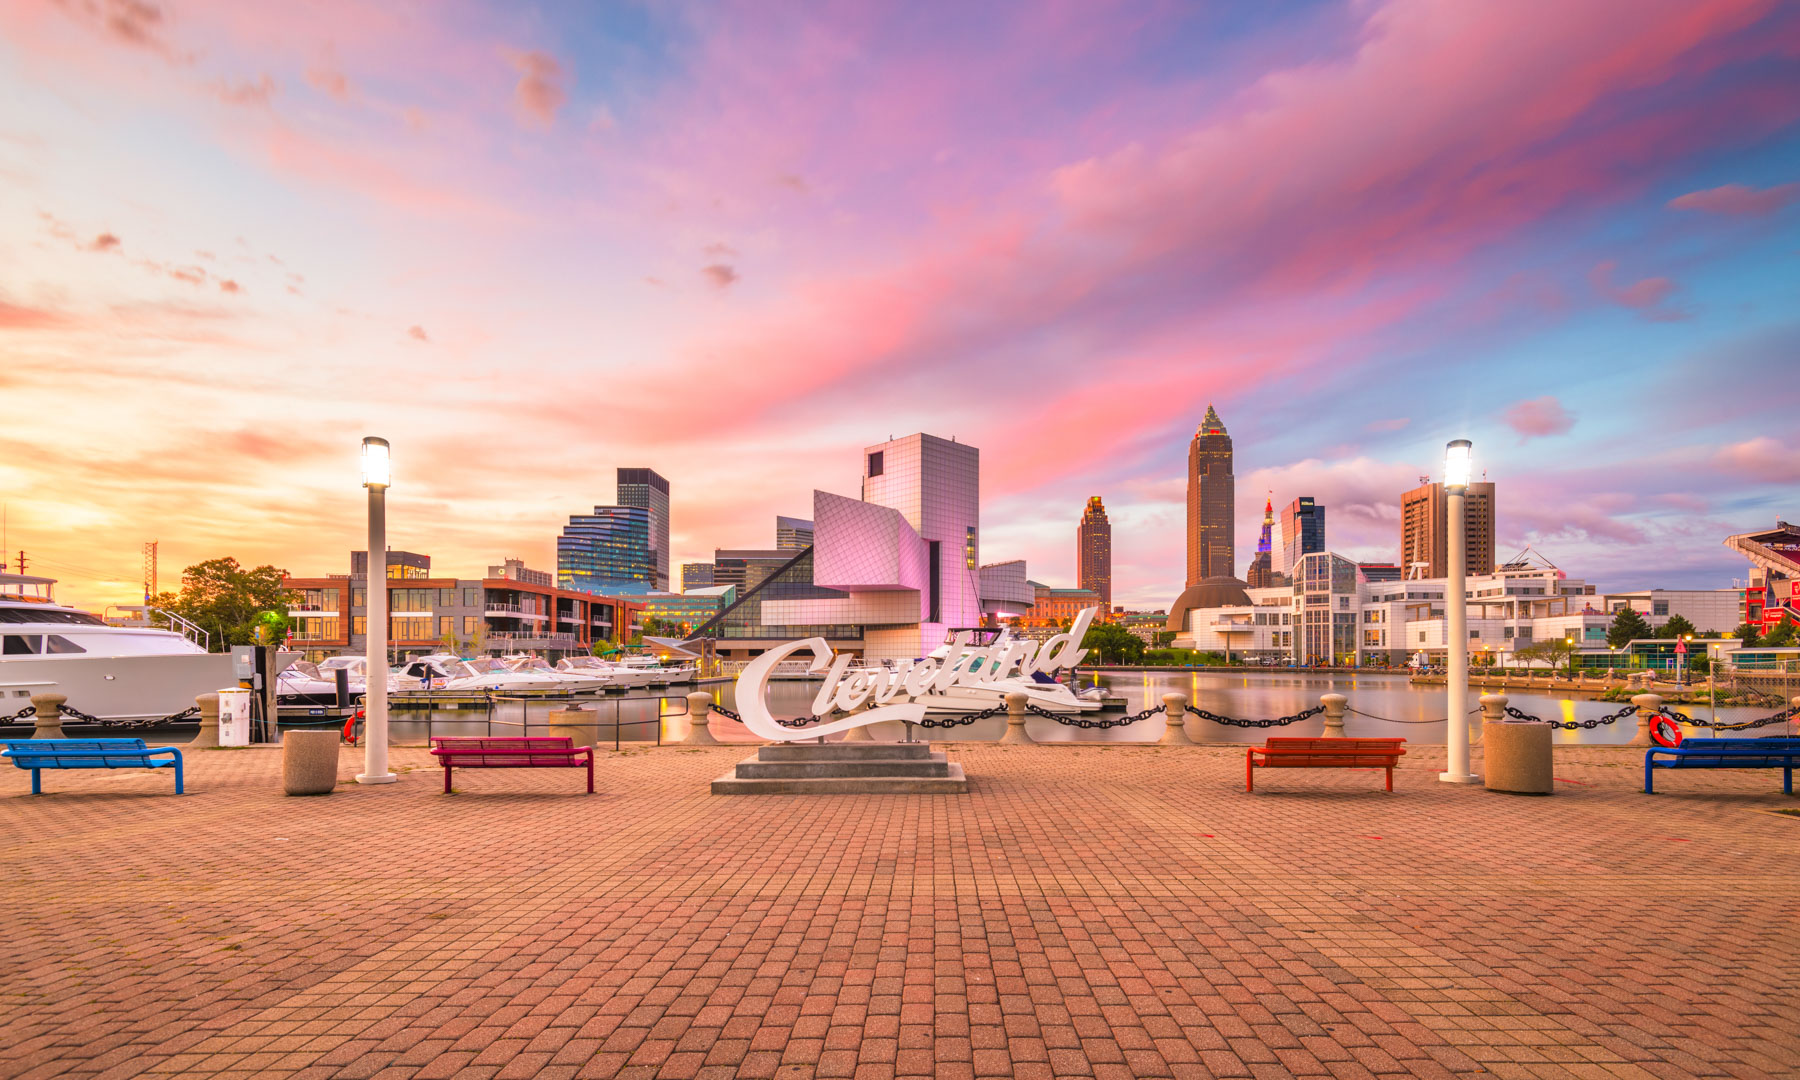 The best things to do in Cleveland